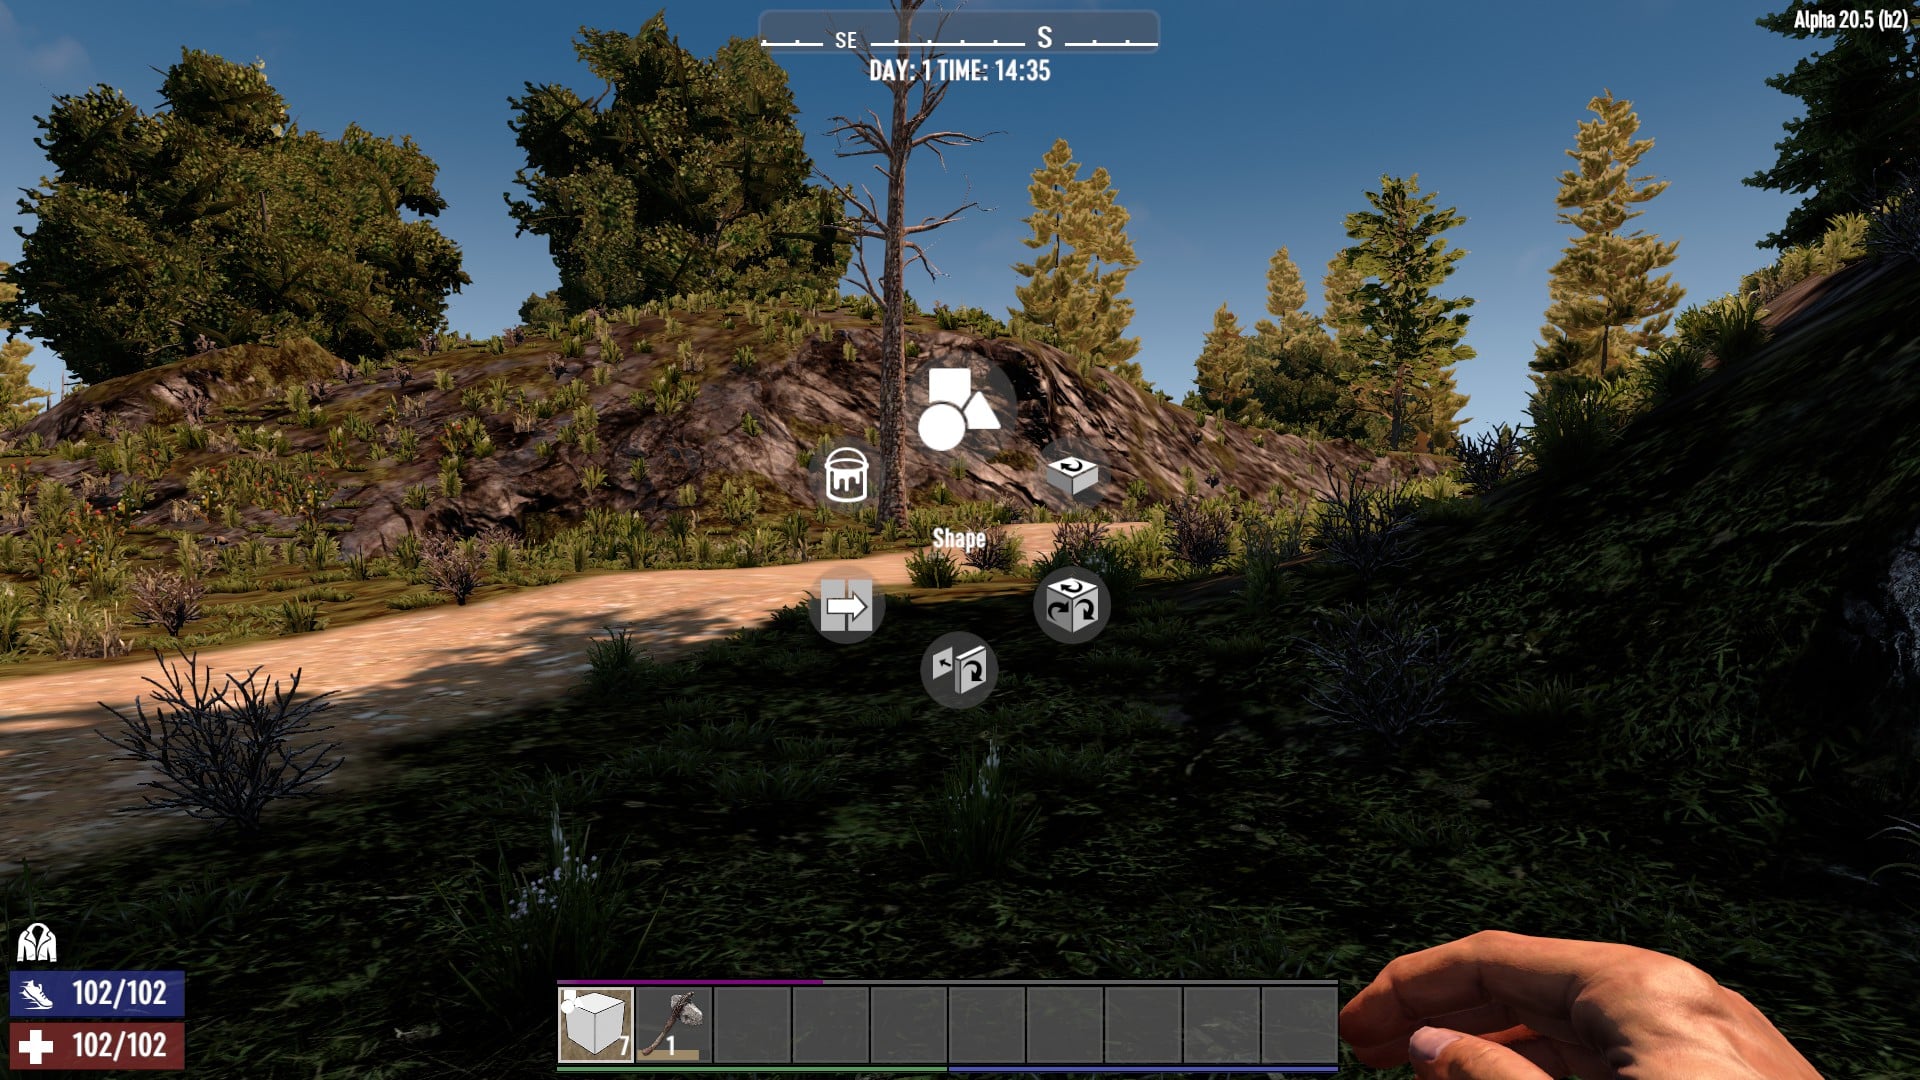 Showing the interaction menu in 7 days to die